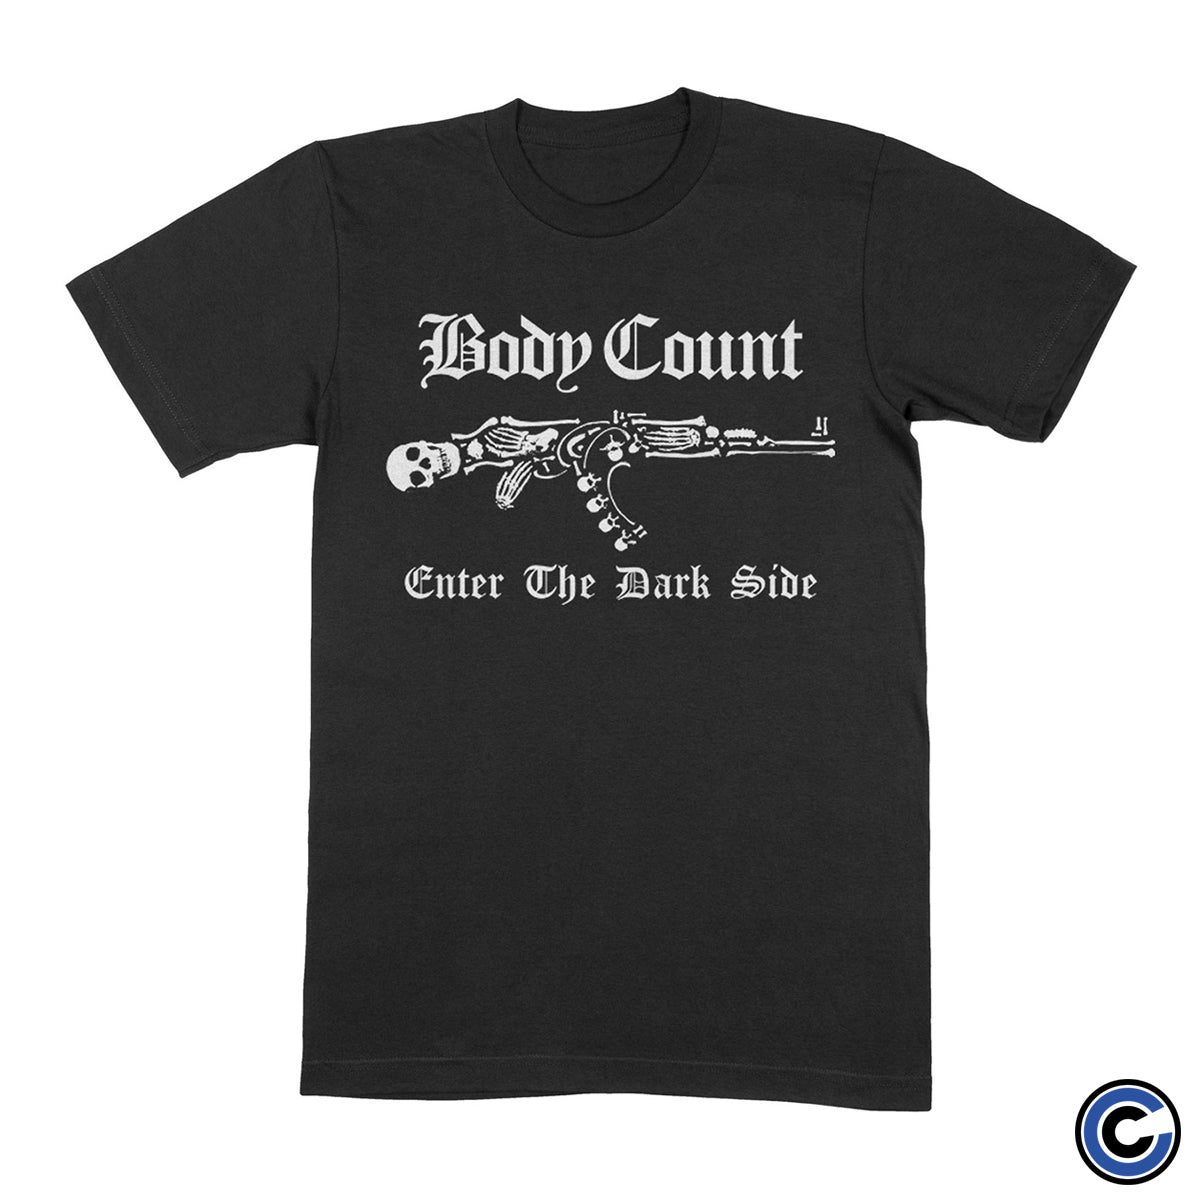 Body Count "Enter The Dark Side" Shirt